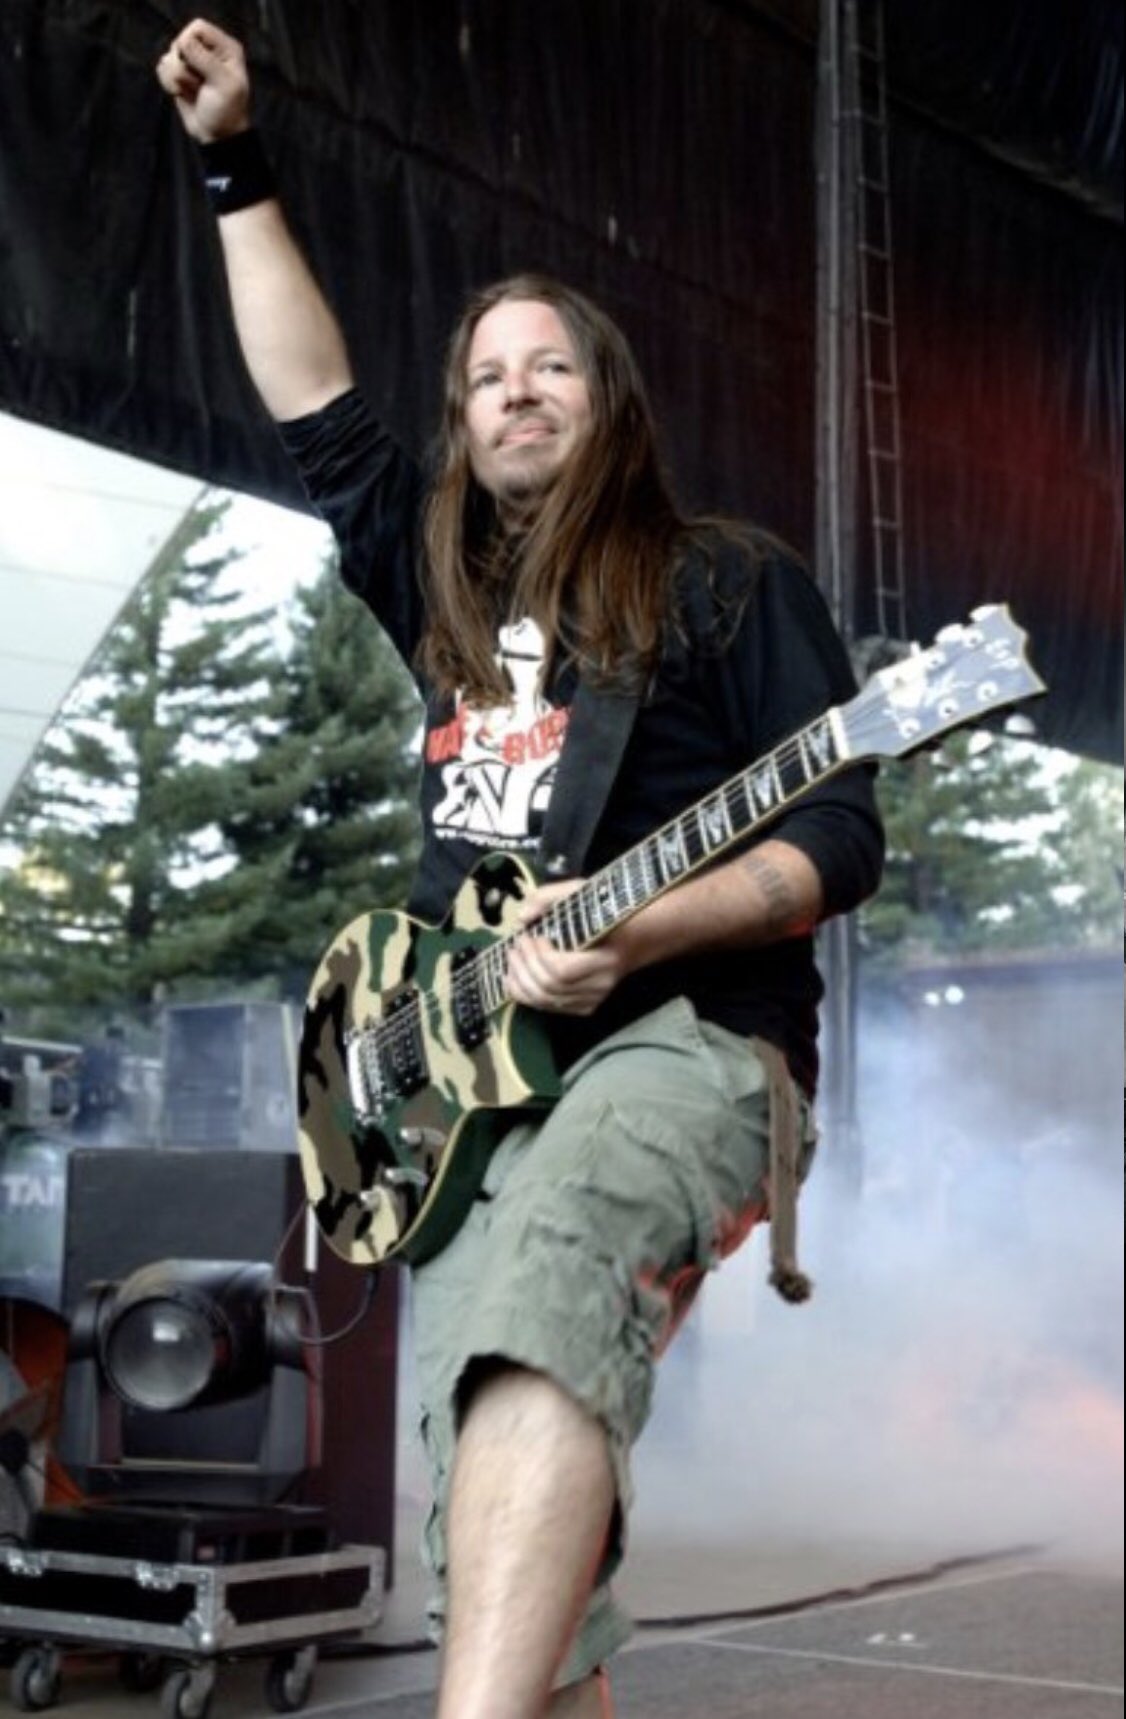 Happy Birthday to the great Lamb of God Guitarist,
Willie Adler \\m/.....    